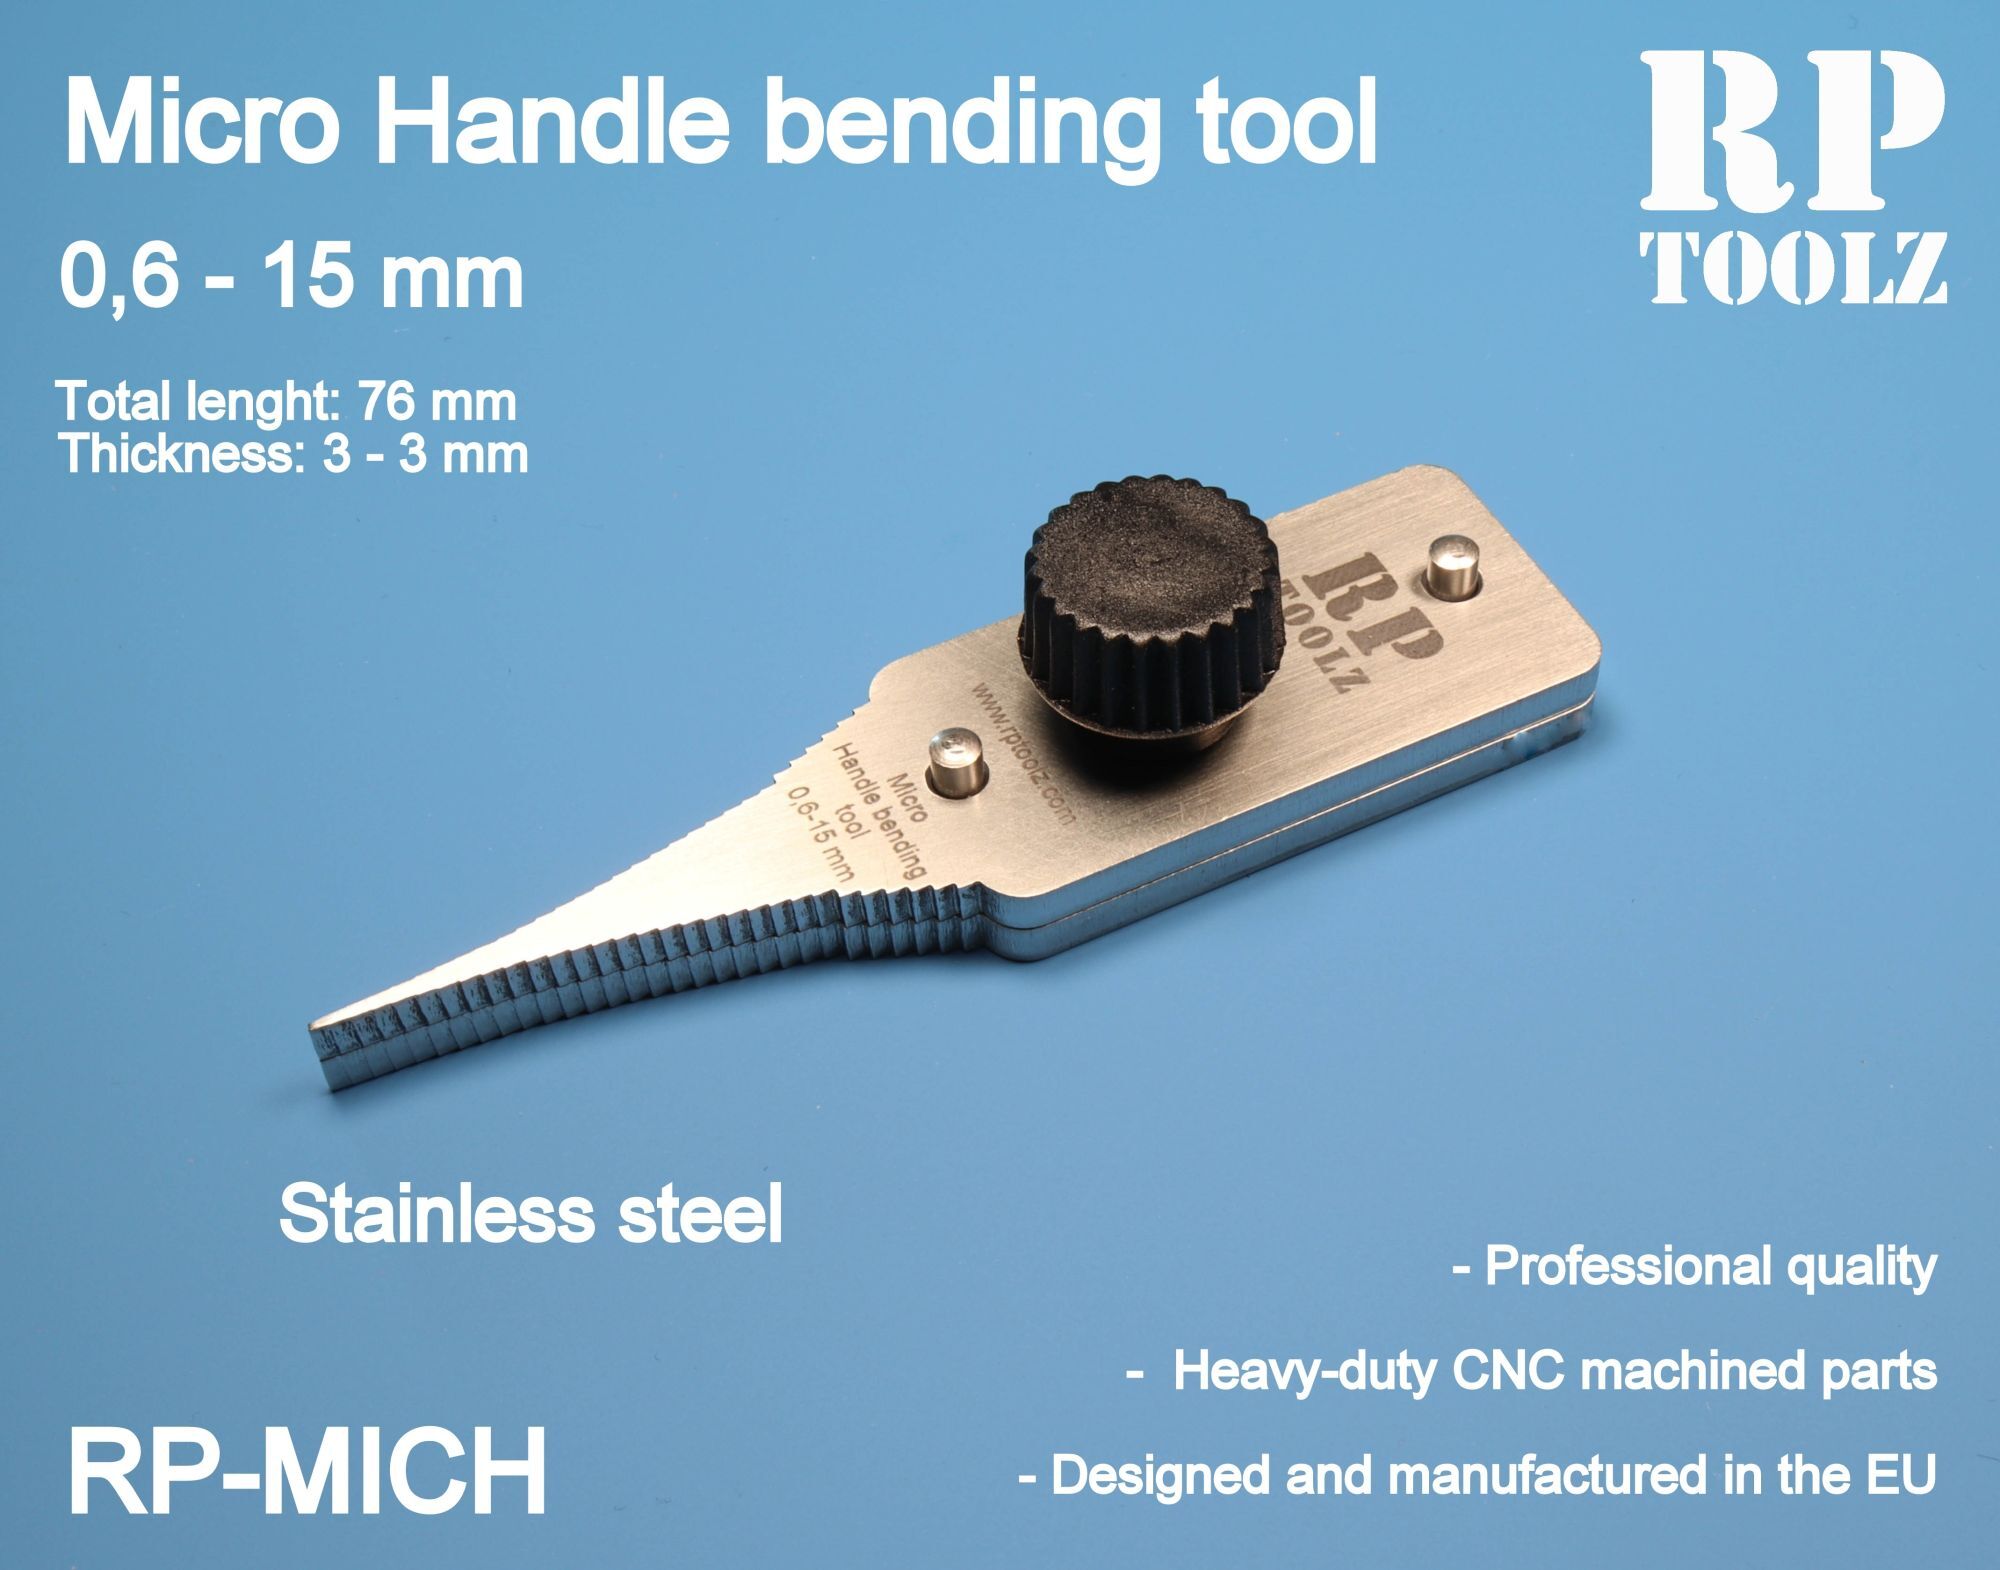 RPTOOLZ[RP-MICH]マイクロハンドルベンダー 0.6 mm to 15 mm - M.S